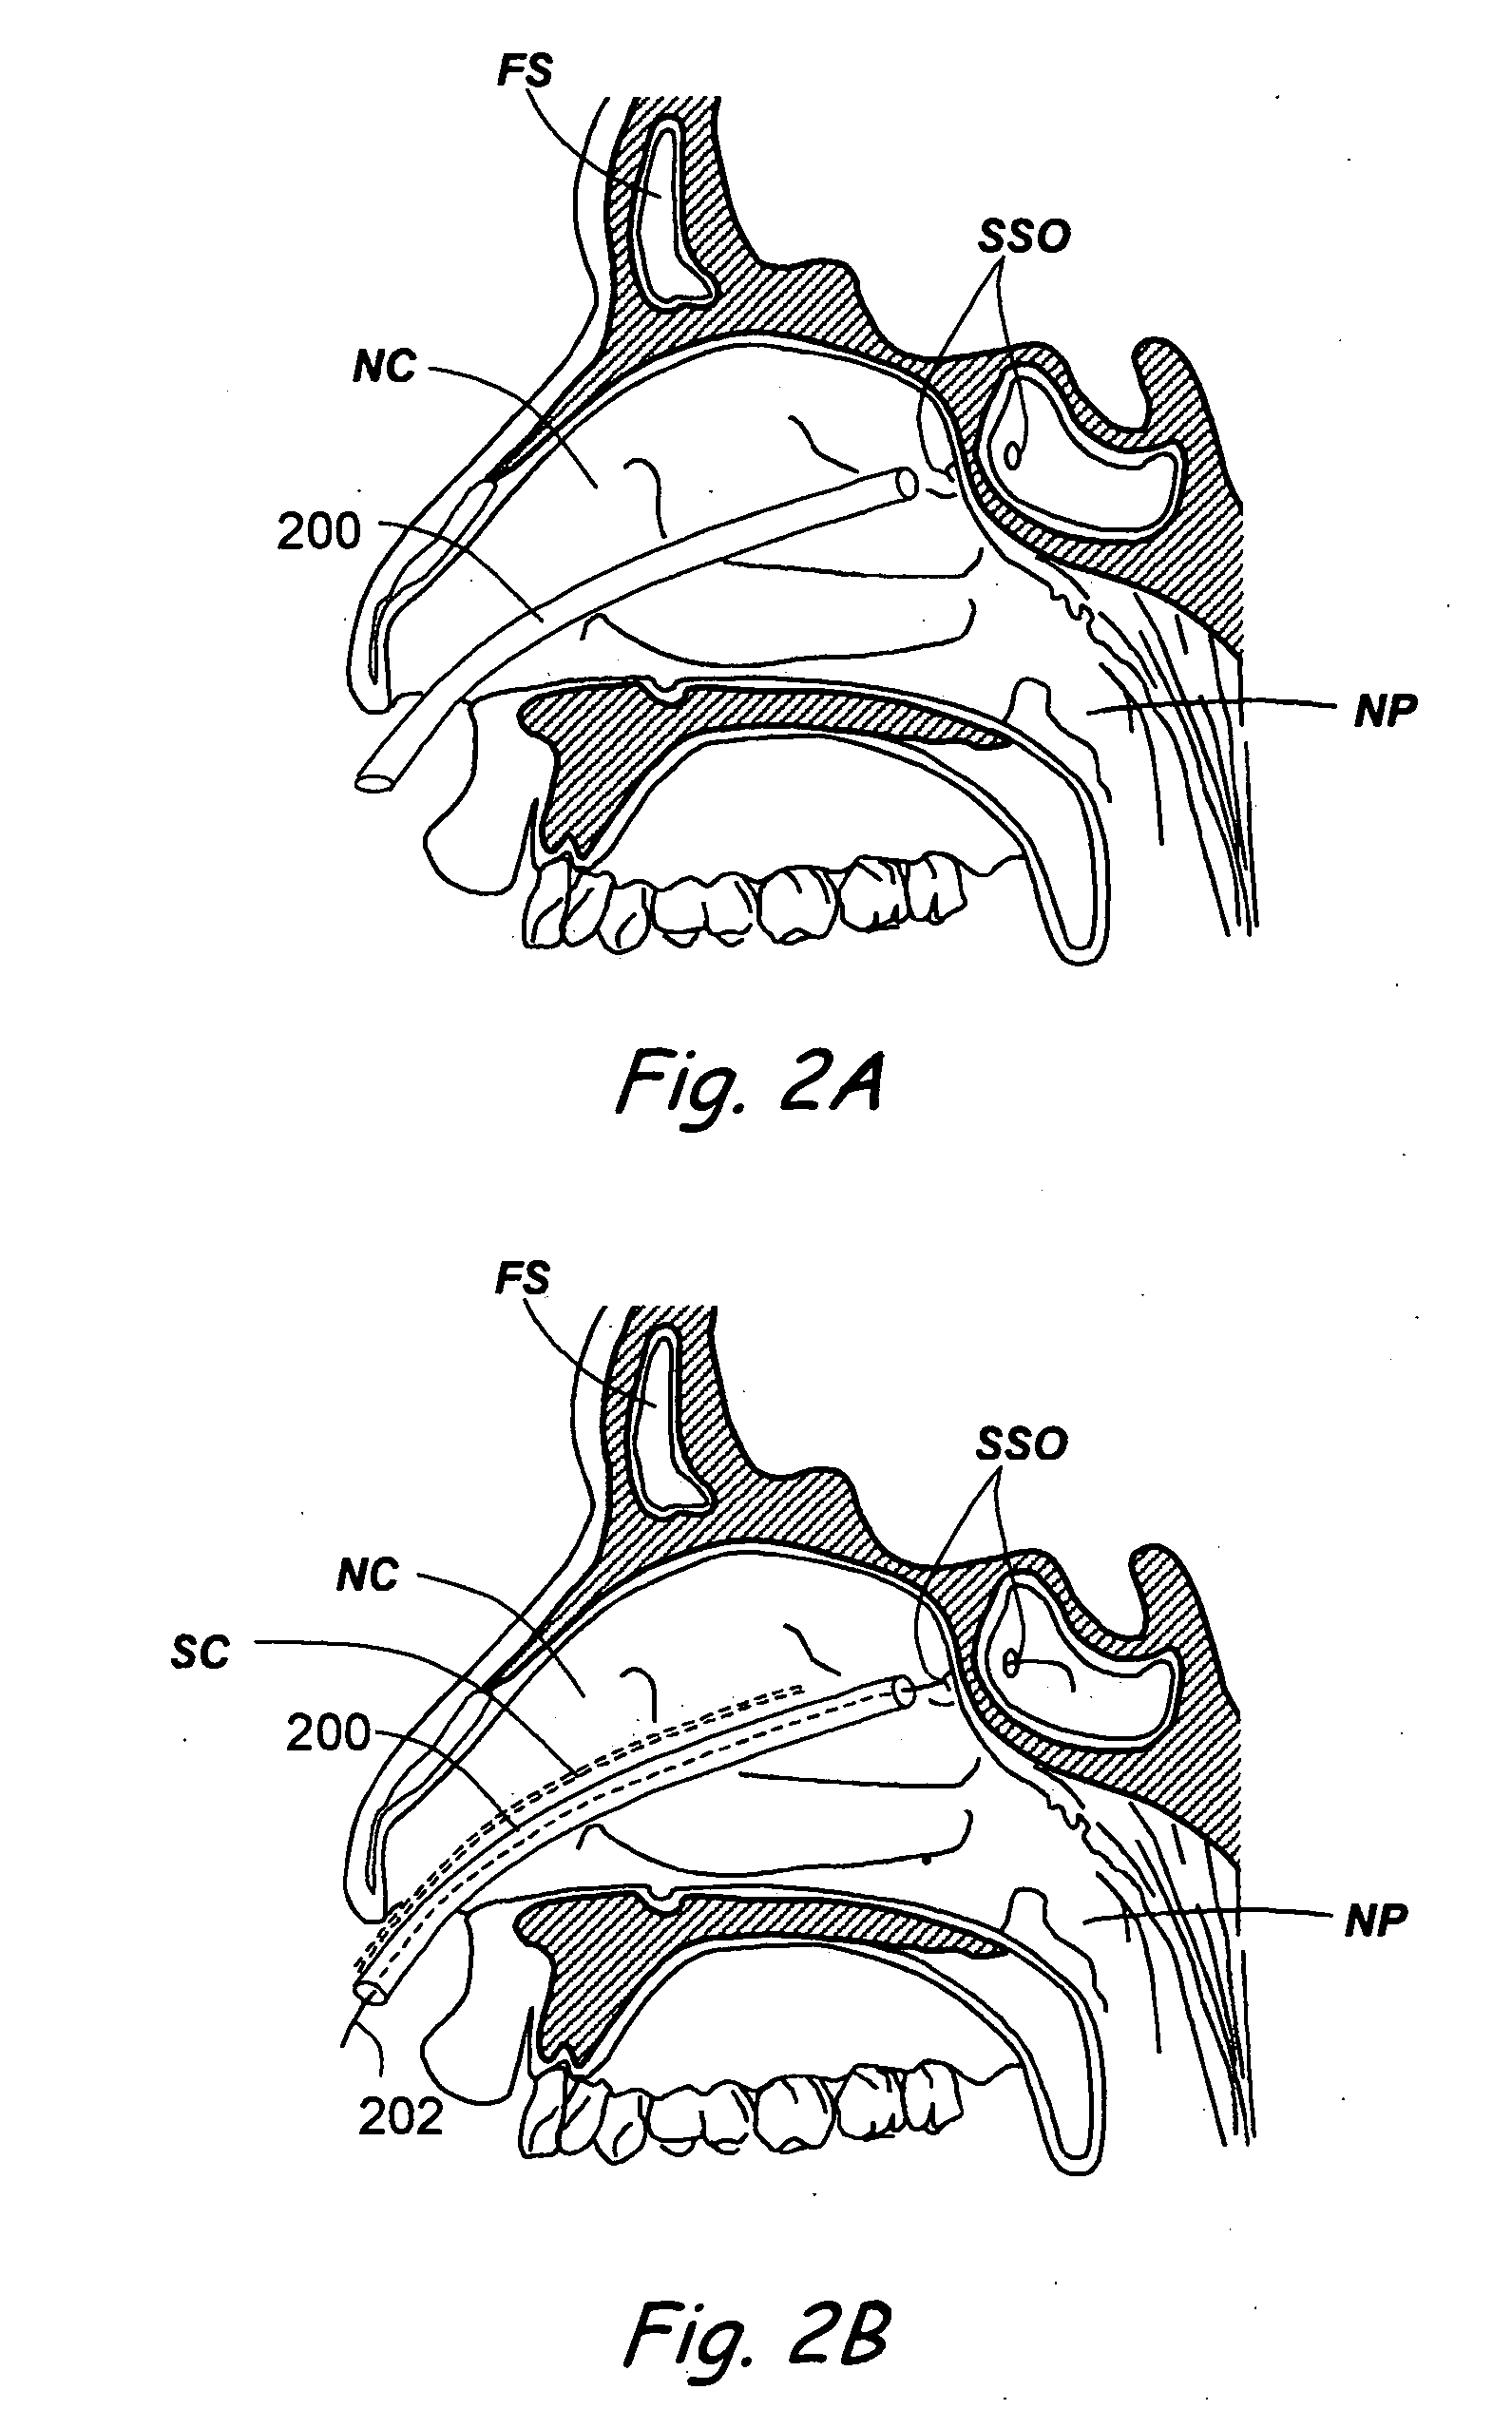 Devices, systems and methods useable for treating sinusitis